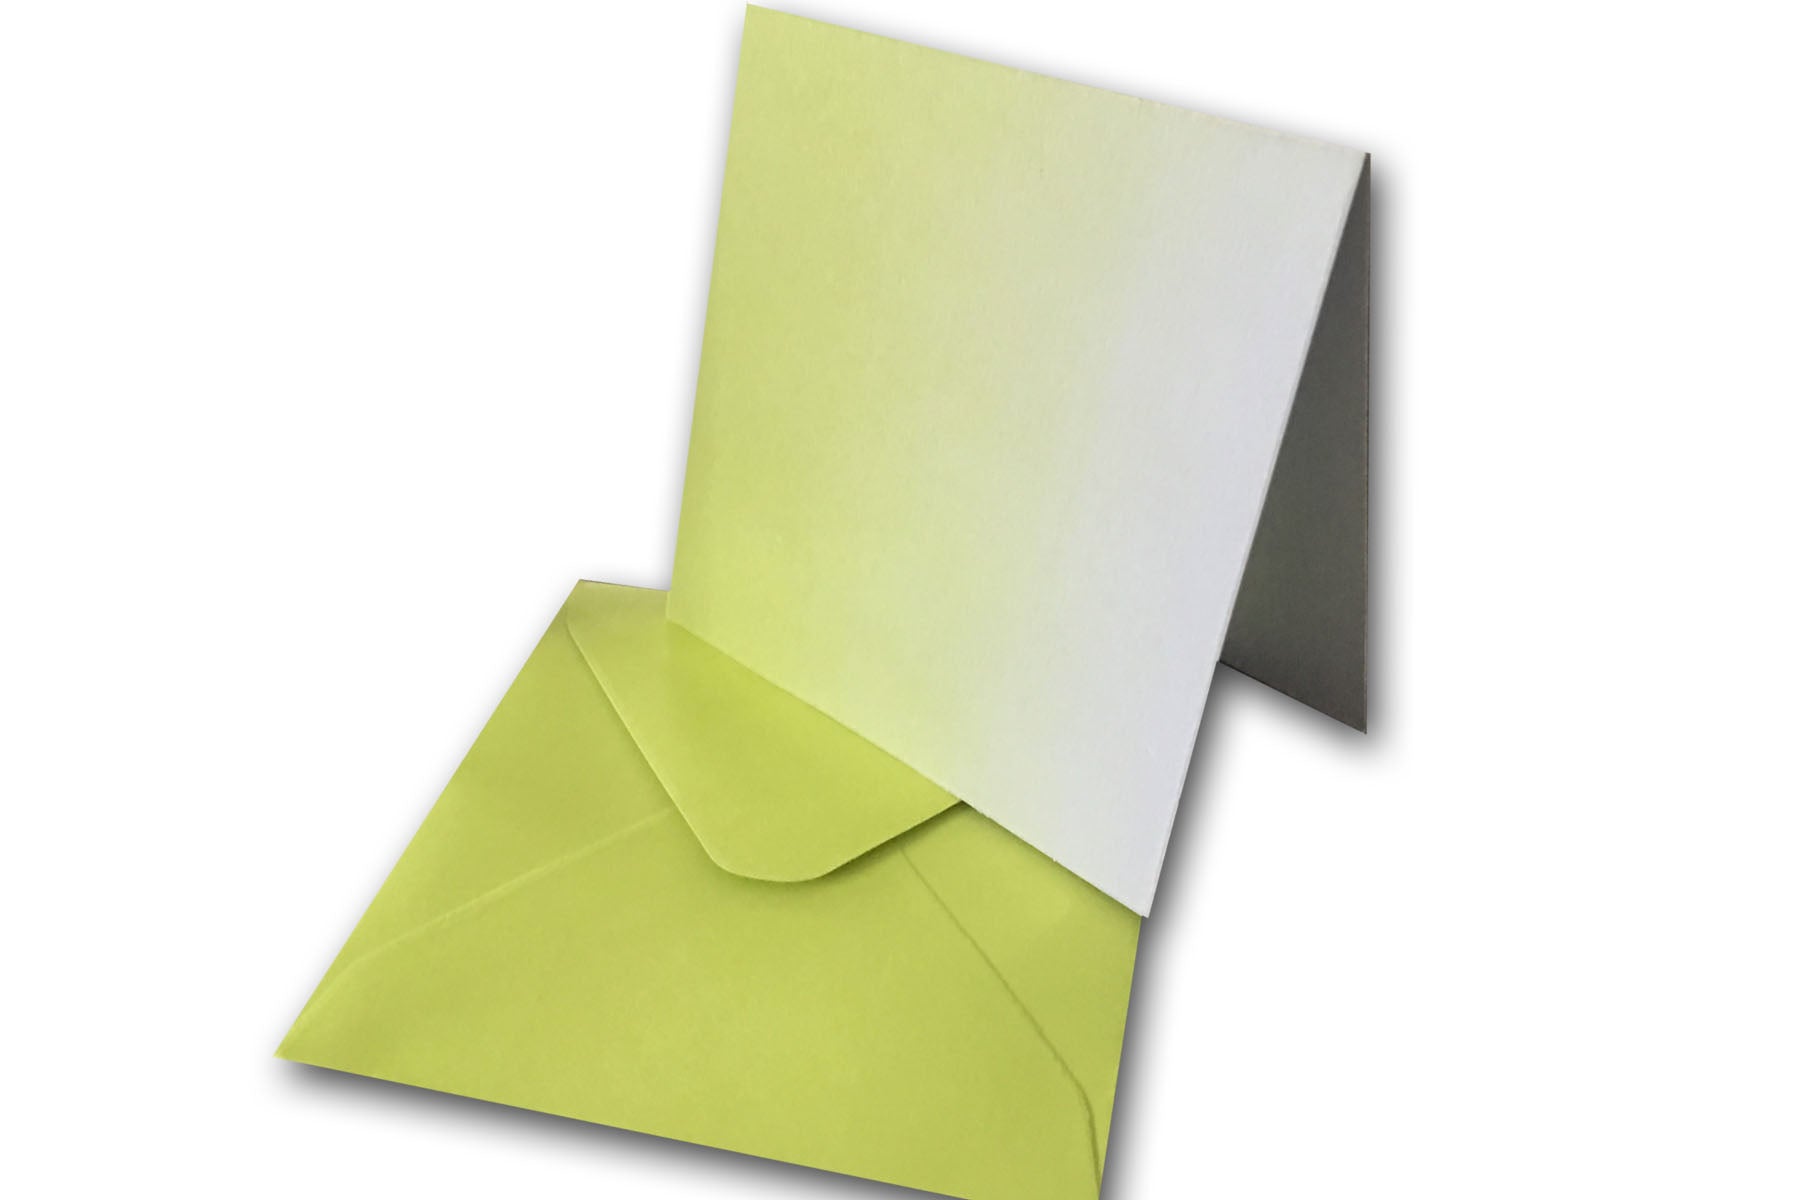 White Folded mini cards for gift tags, florist notes, and more -  CutCardStock